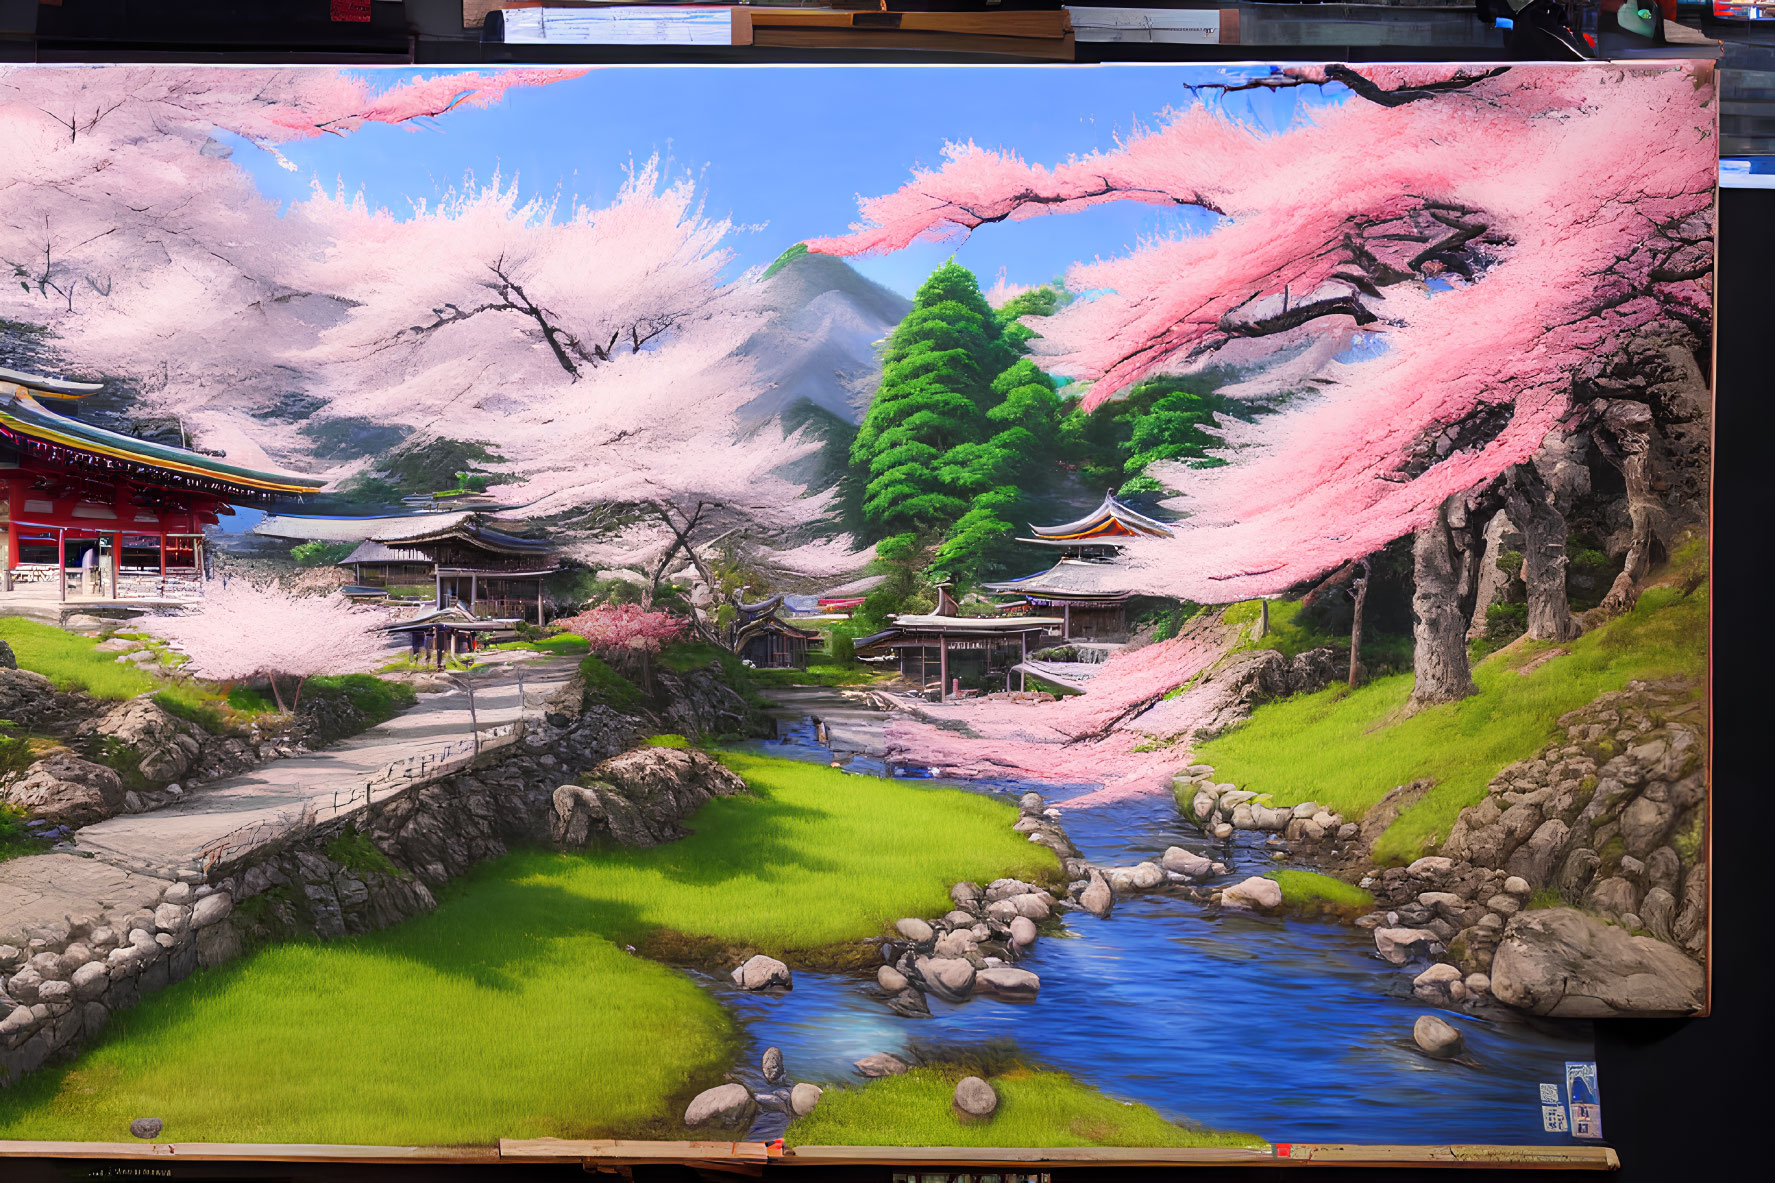 Japanese landscape with cherry blossoms, stream, traditional buildings, and blue sky